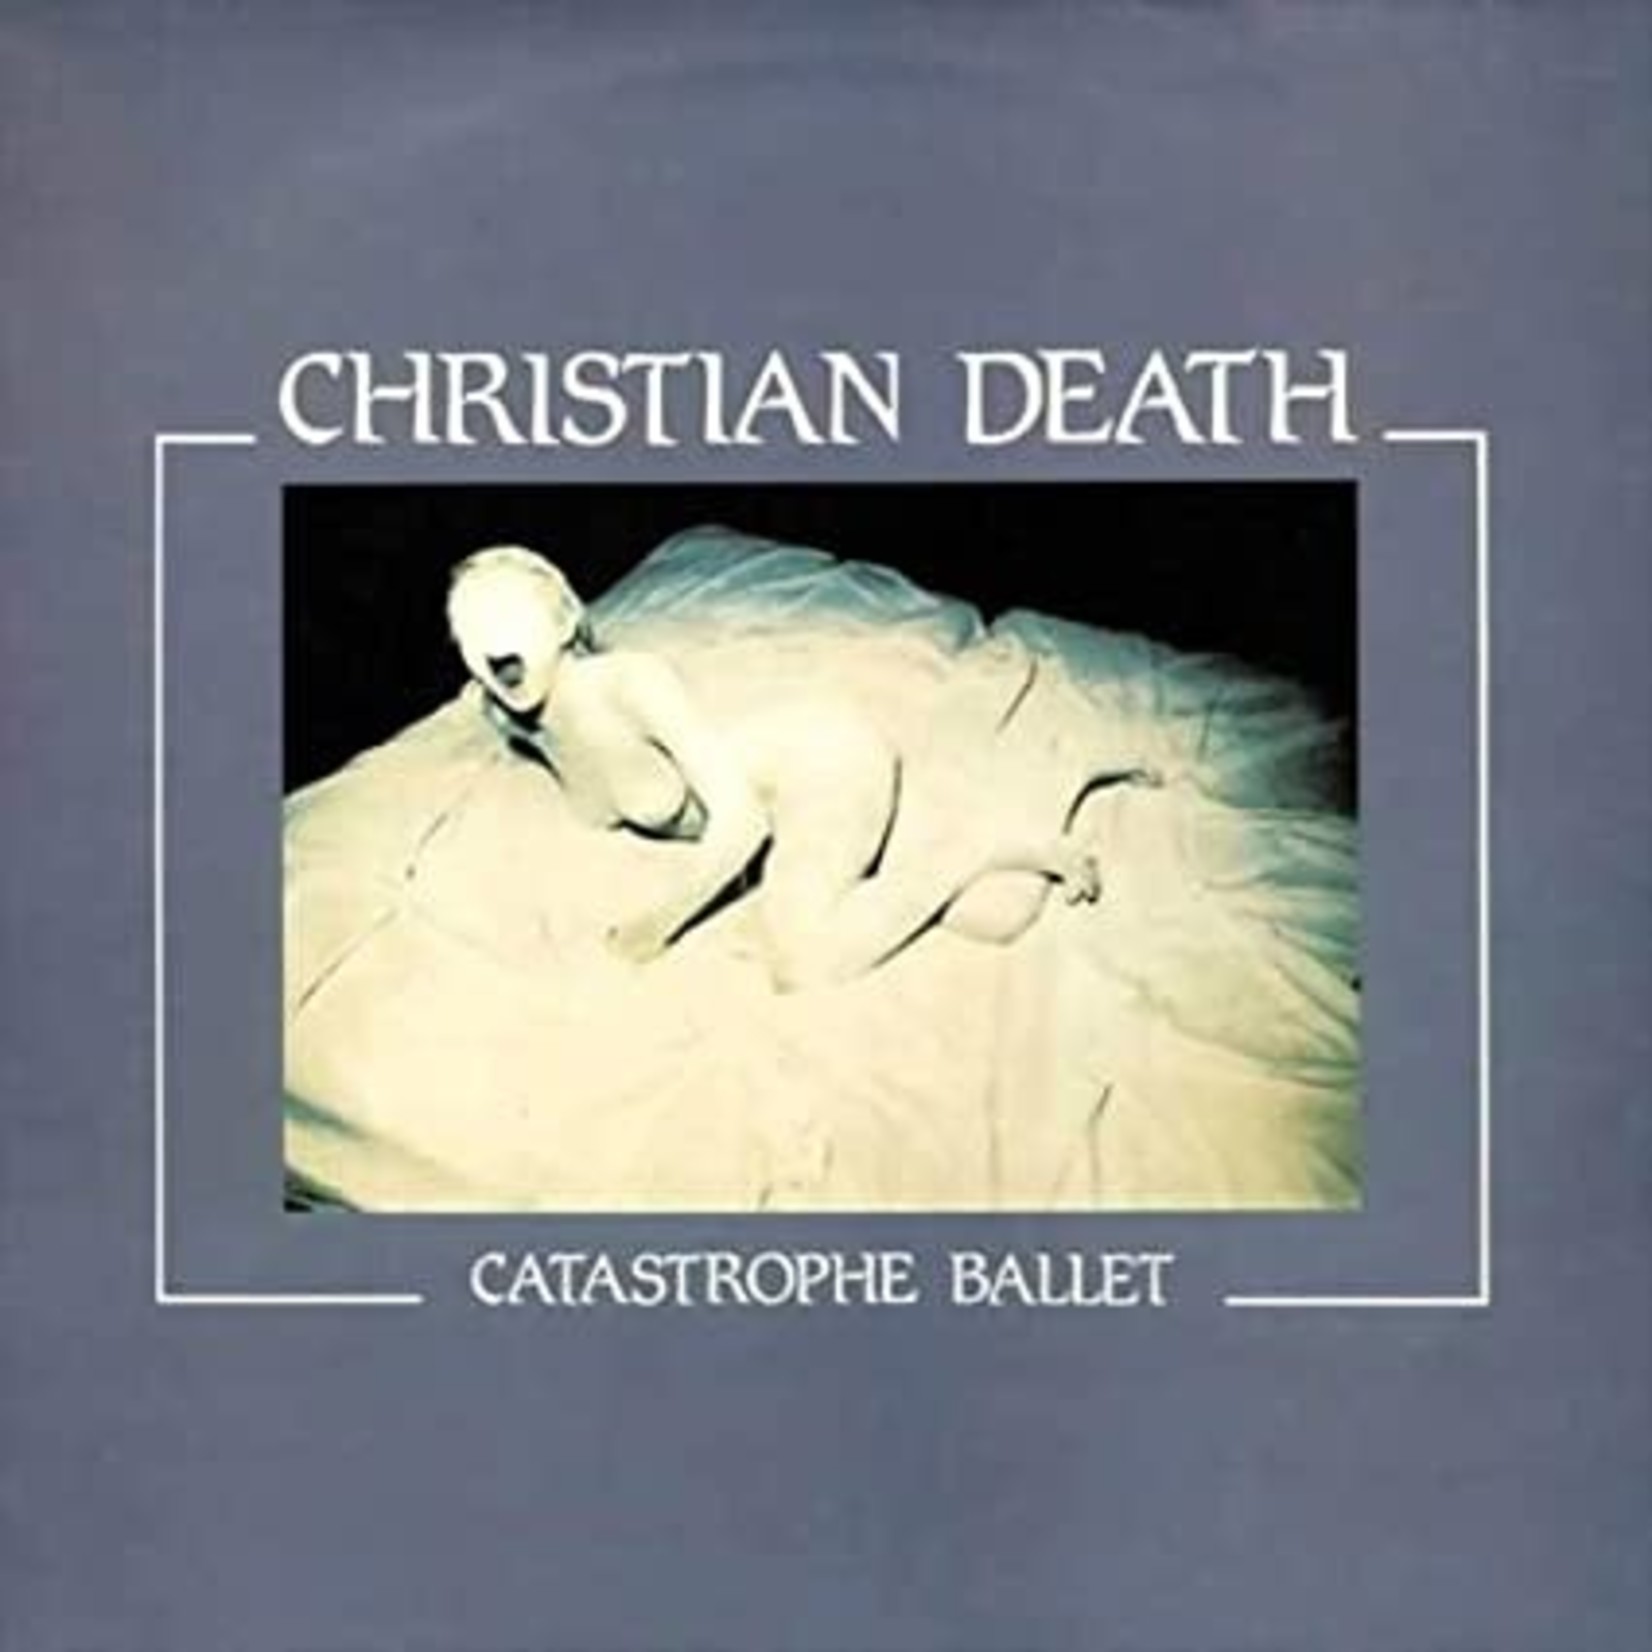 [New] Christian Death - Catastrophe Ballet (limited edition gatefold)